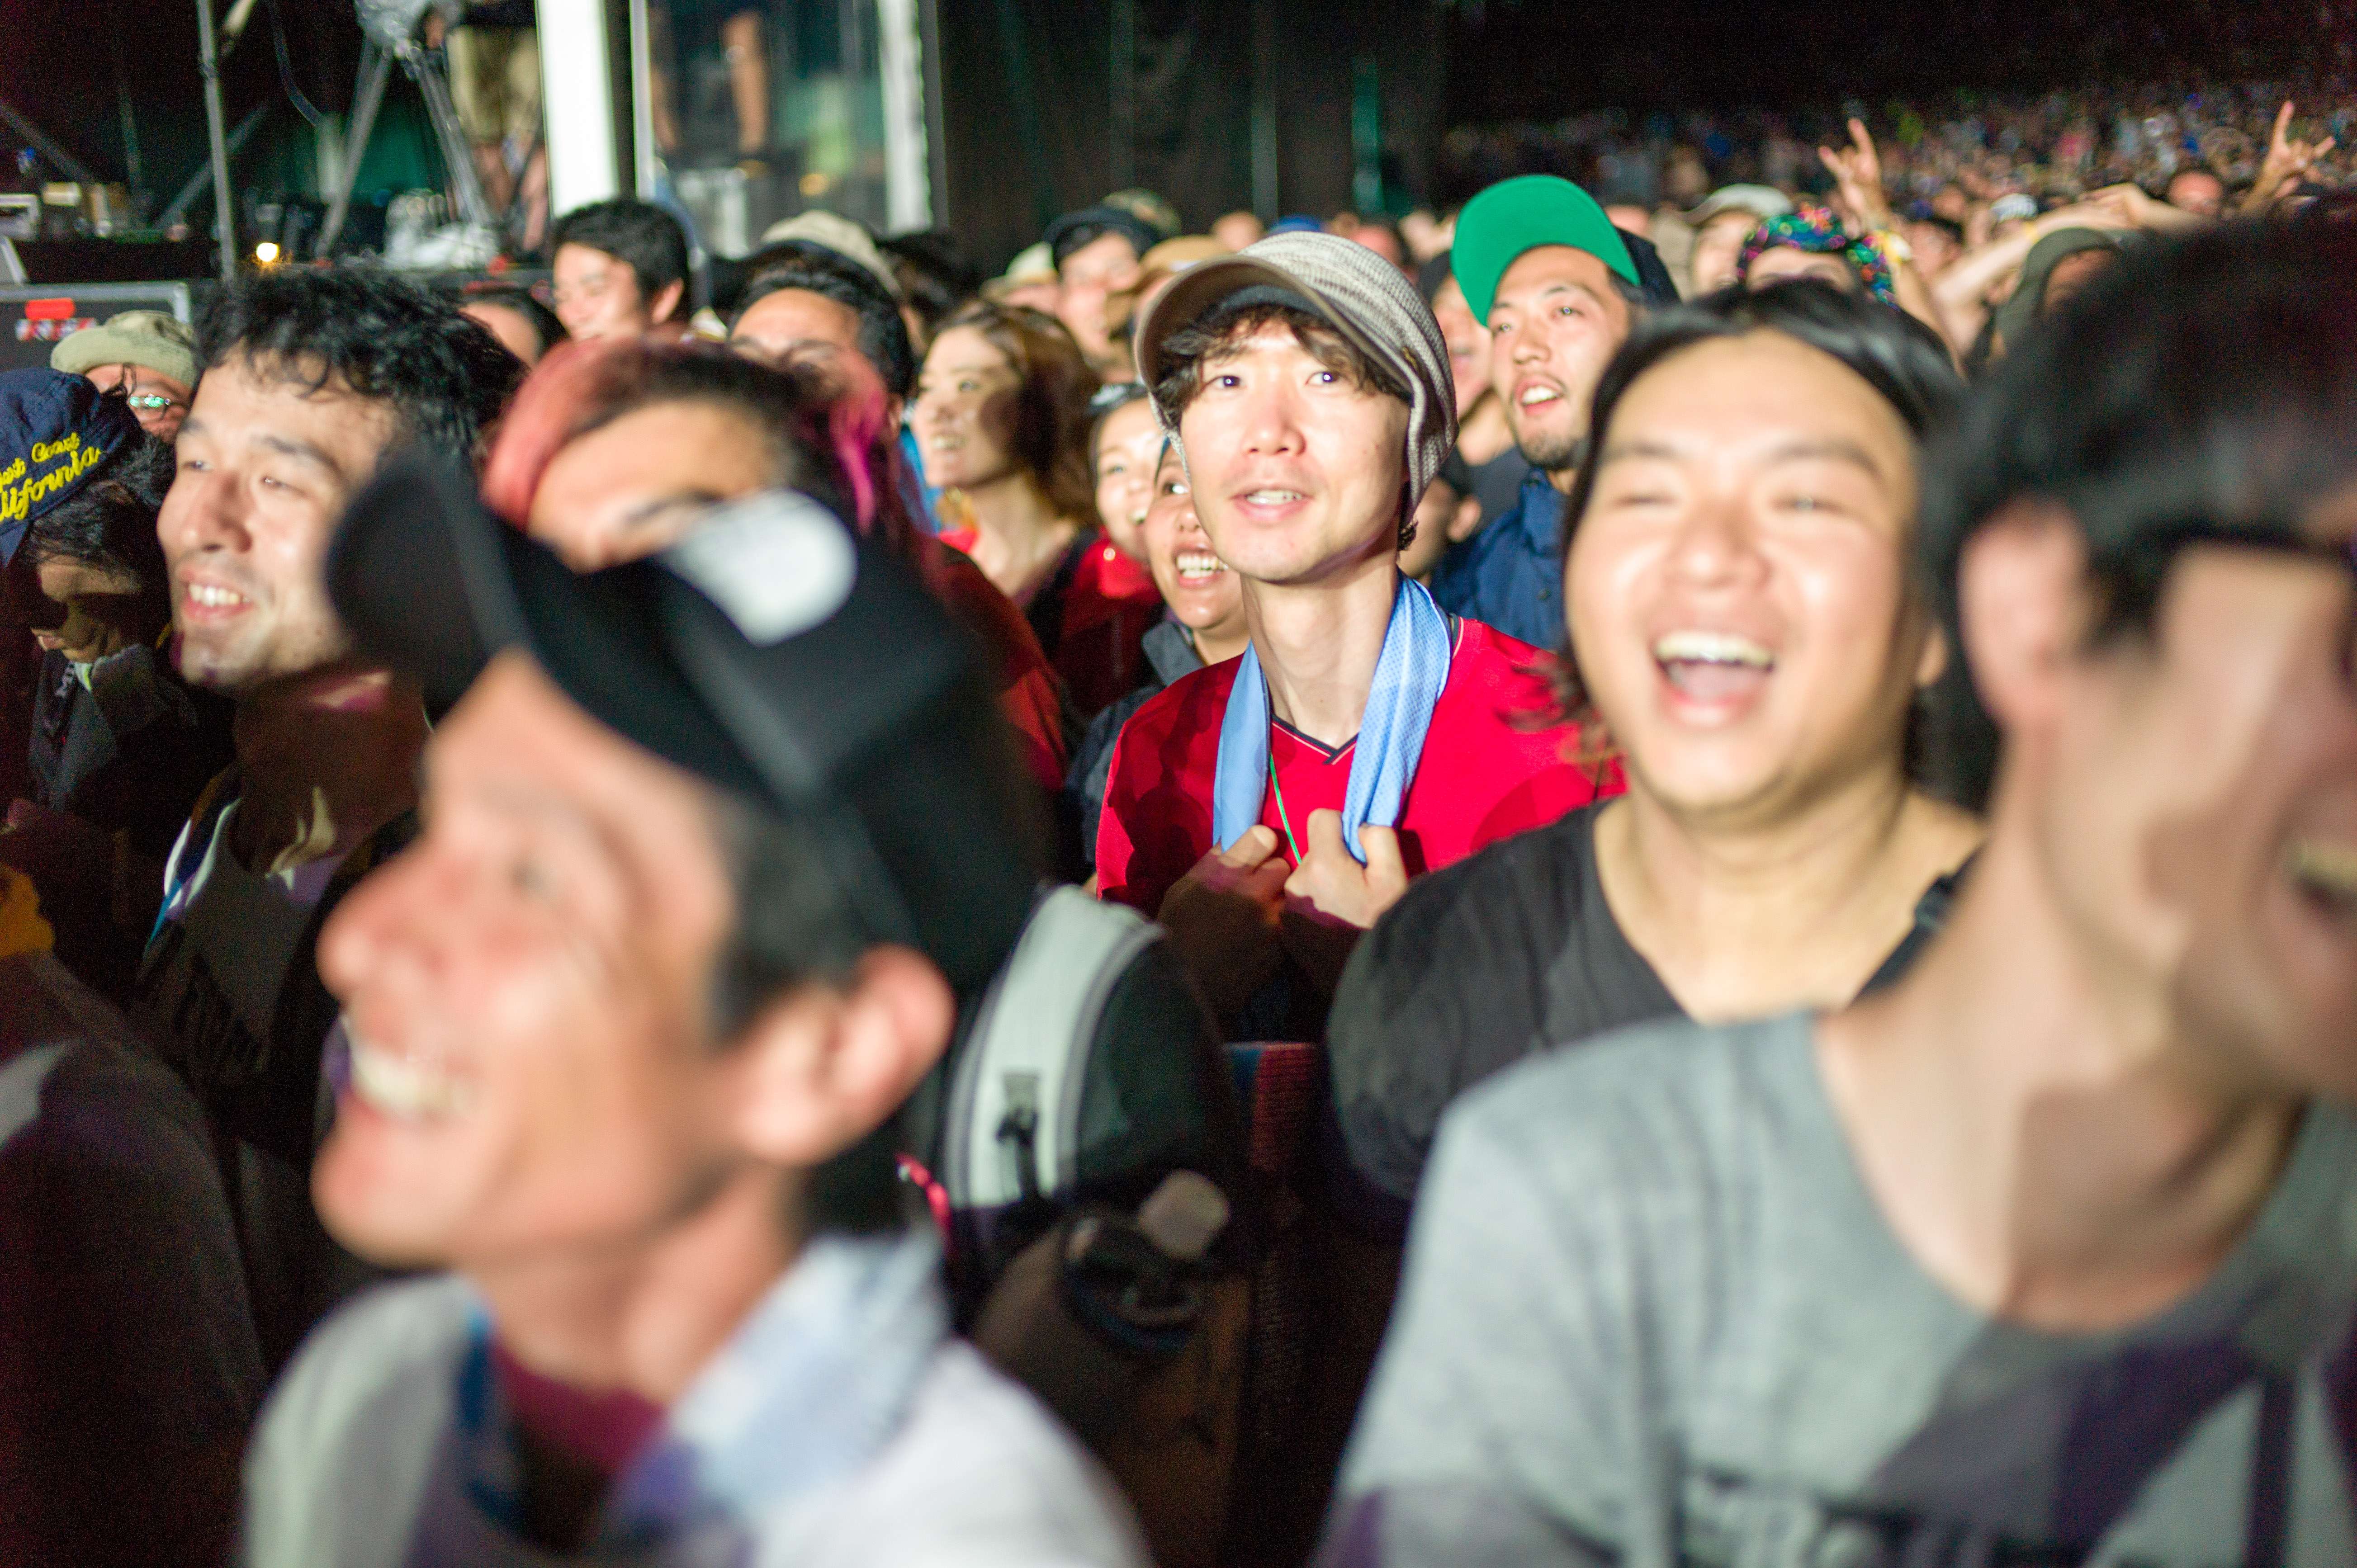 Fuji Rock is one of the biggest music festivals in Asia, and is celebrating its 20th anniversary this year. Photos: Kevin Utting